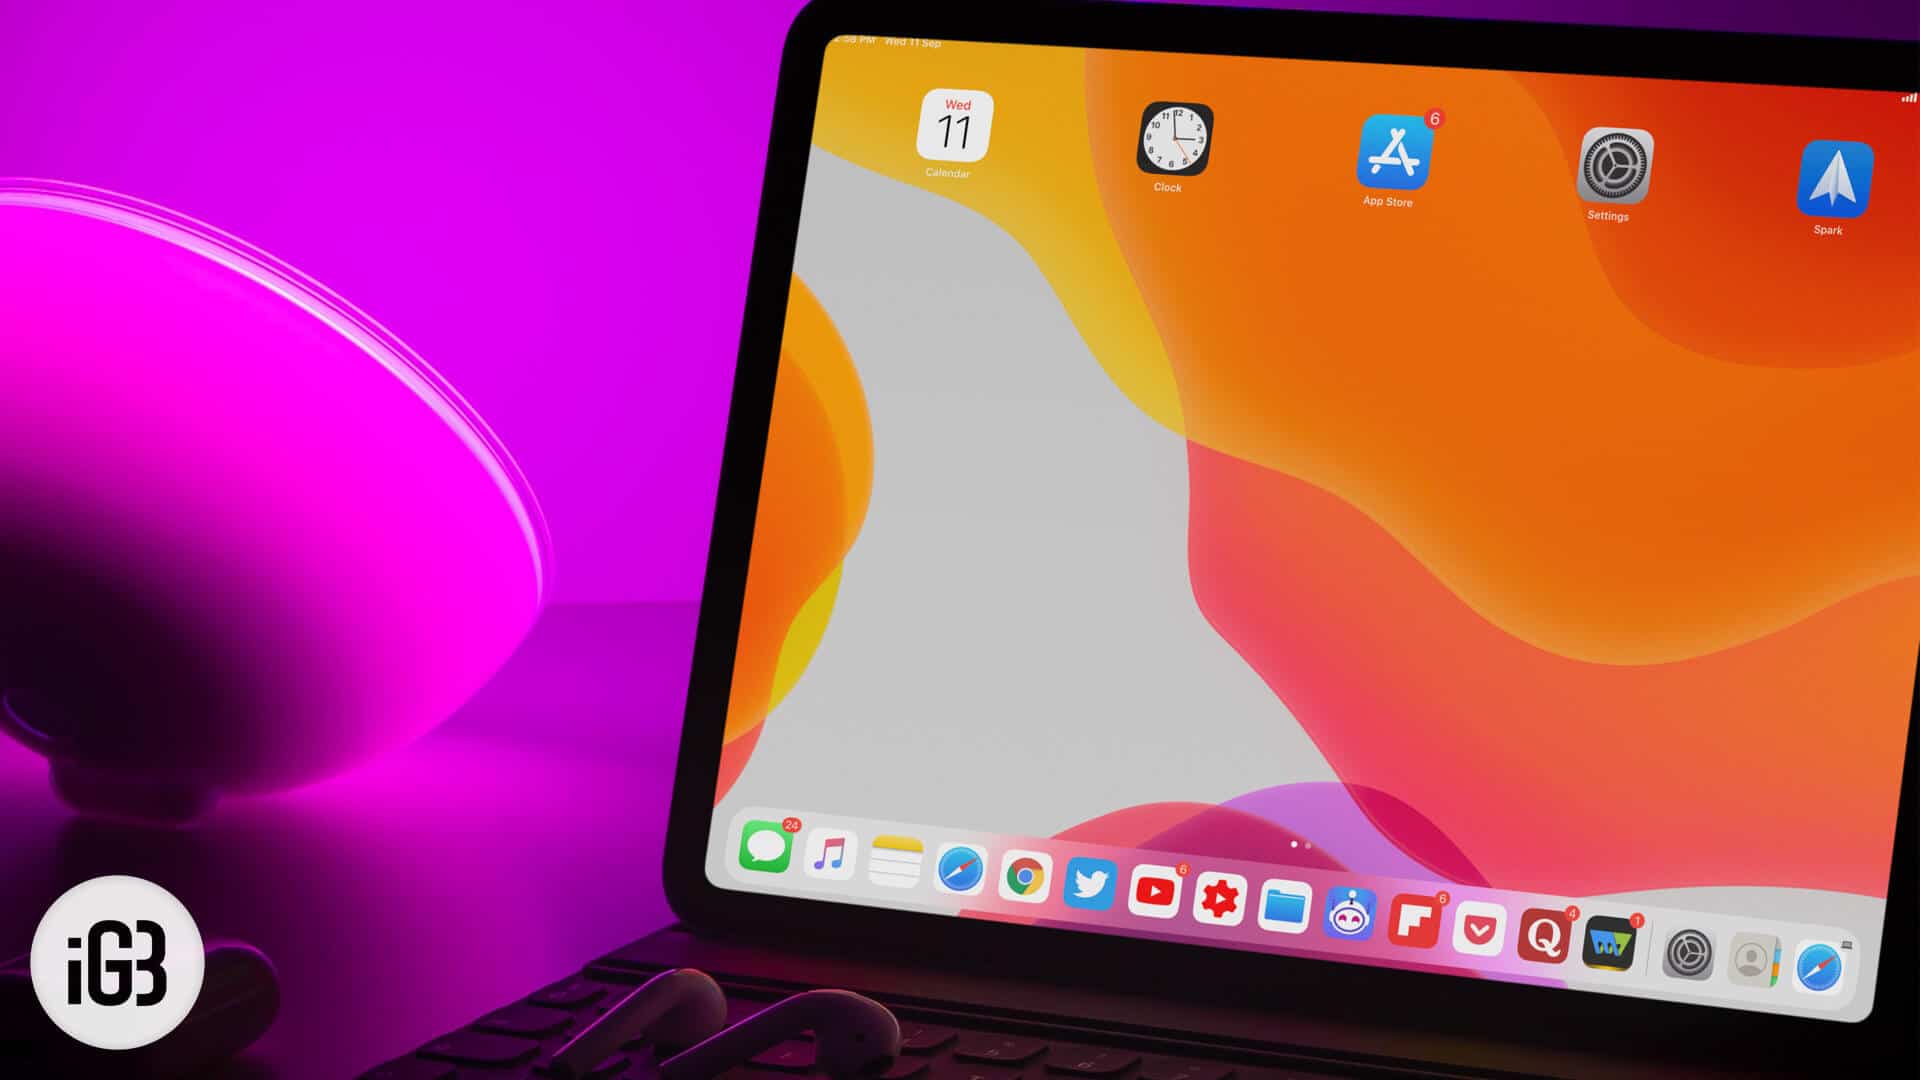 How to change ipad icon size on the home screen in ipados